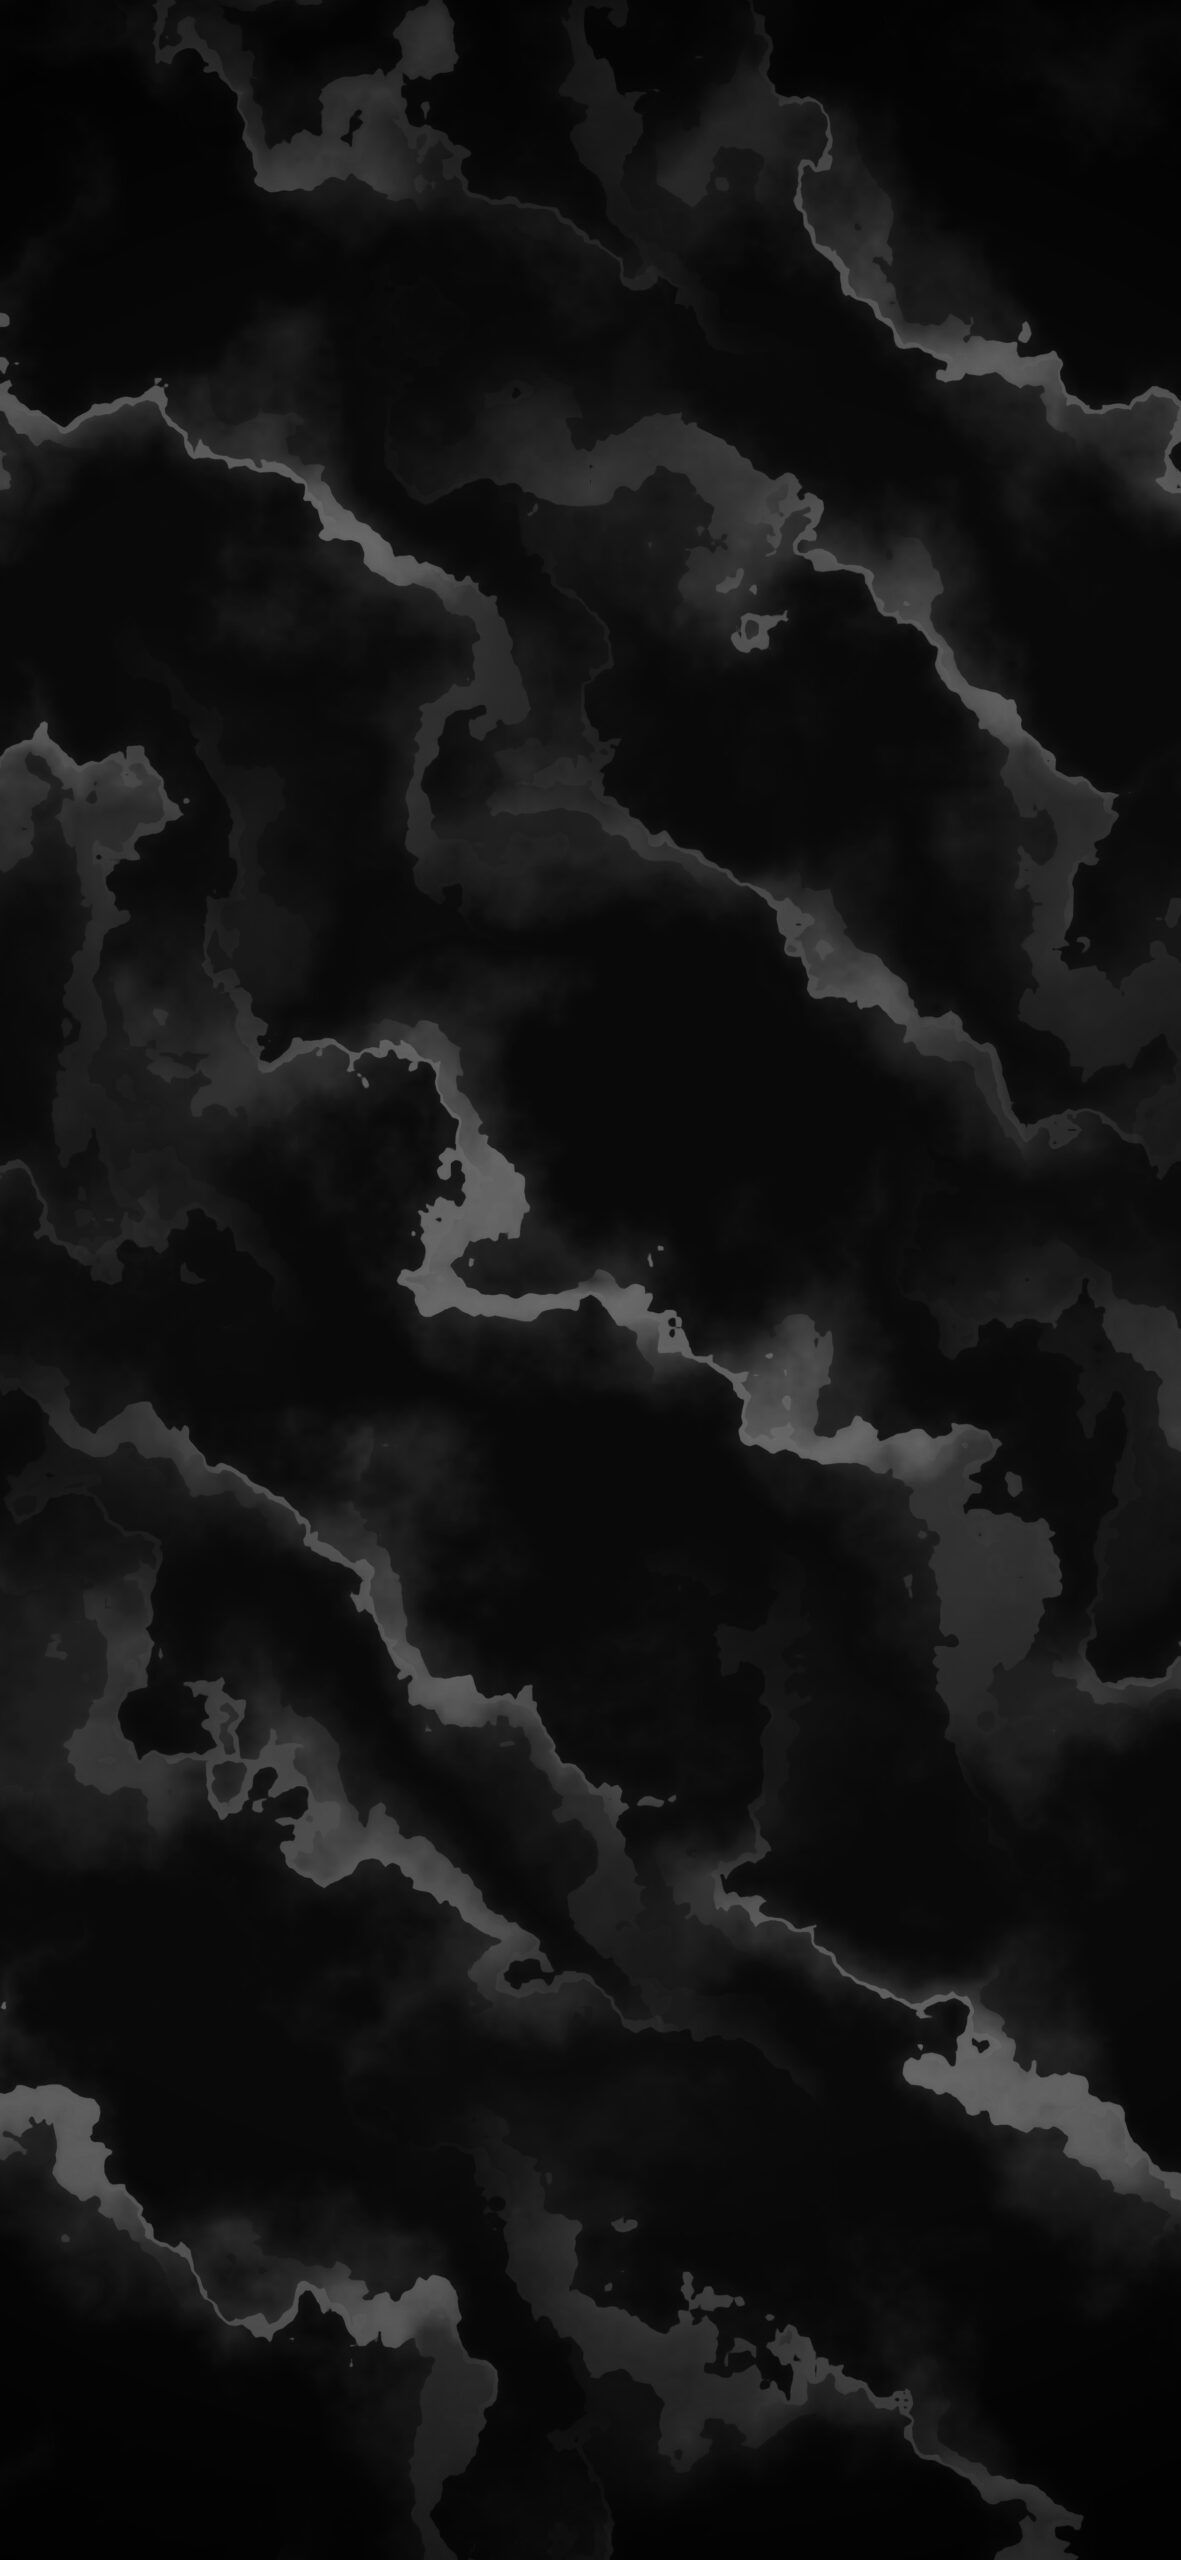 A black and white marble background - Glitch